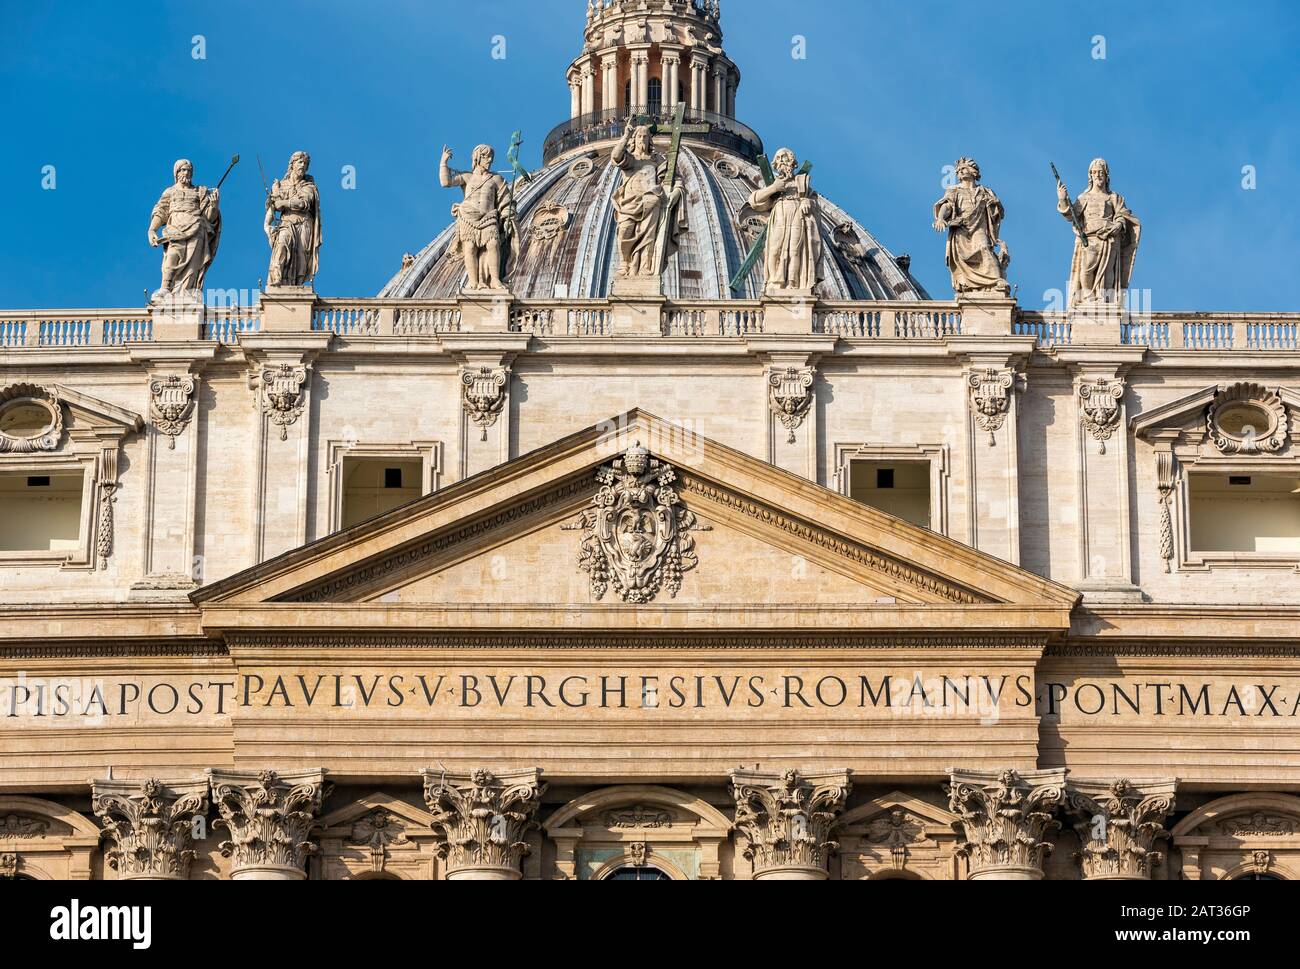 Facade with statues of saints, St Peter's Basilica, Piazza San Pietro, Vatican, Rome, Italy Stock Photo